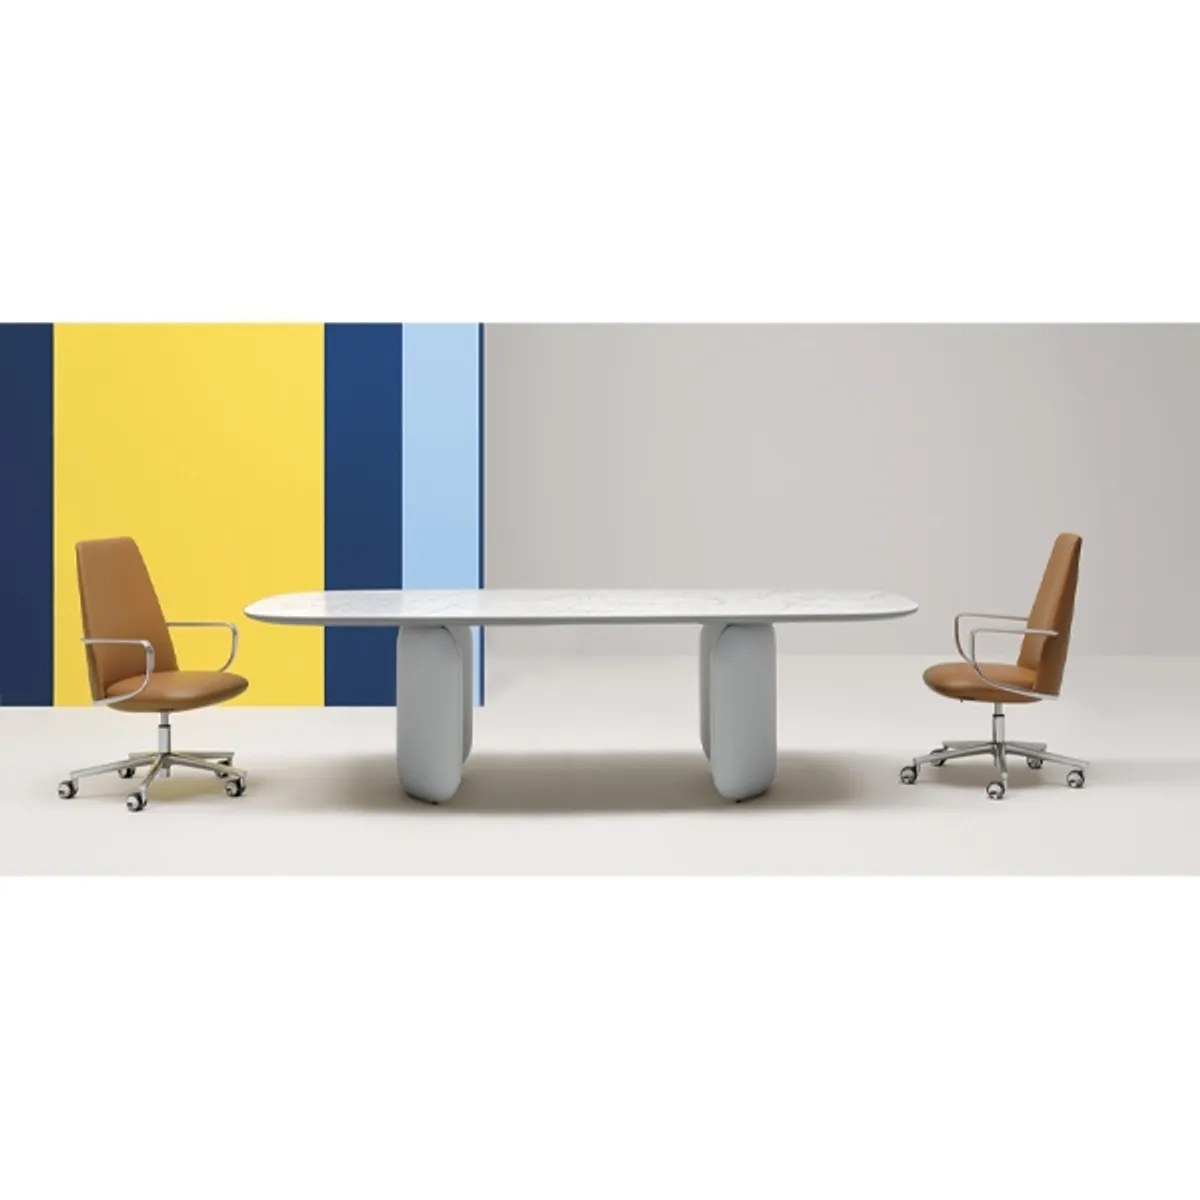 Elinor large desk Inside Out Contracts2